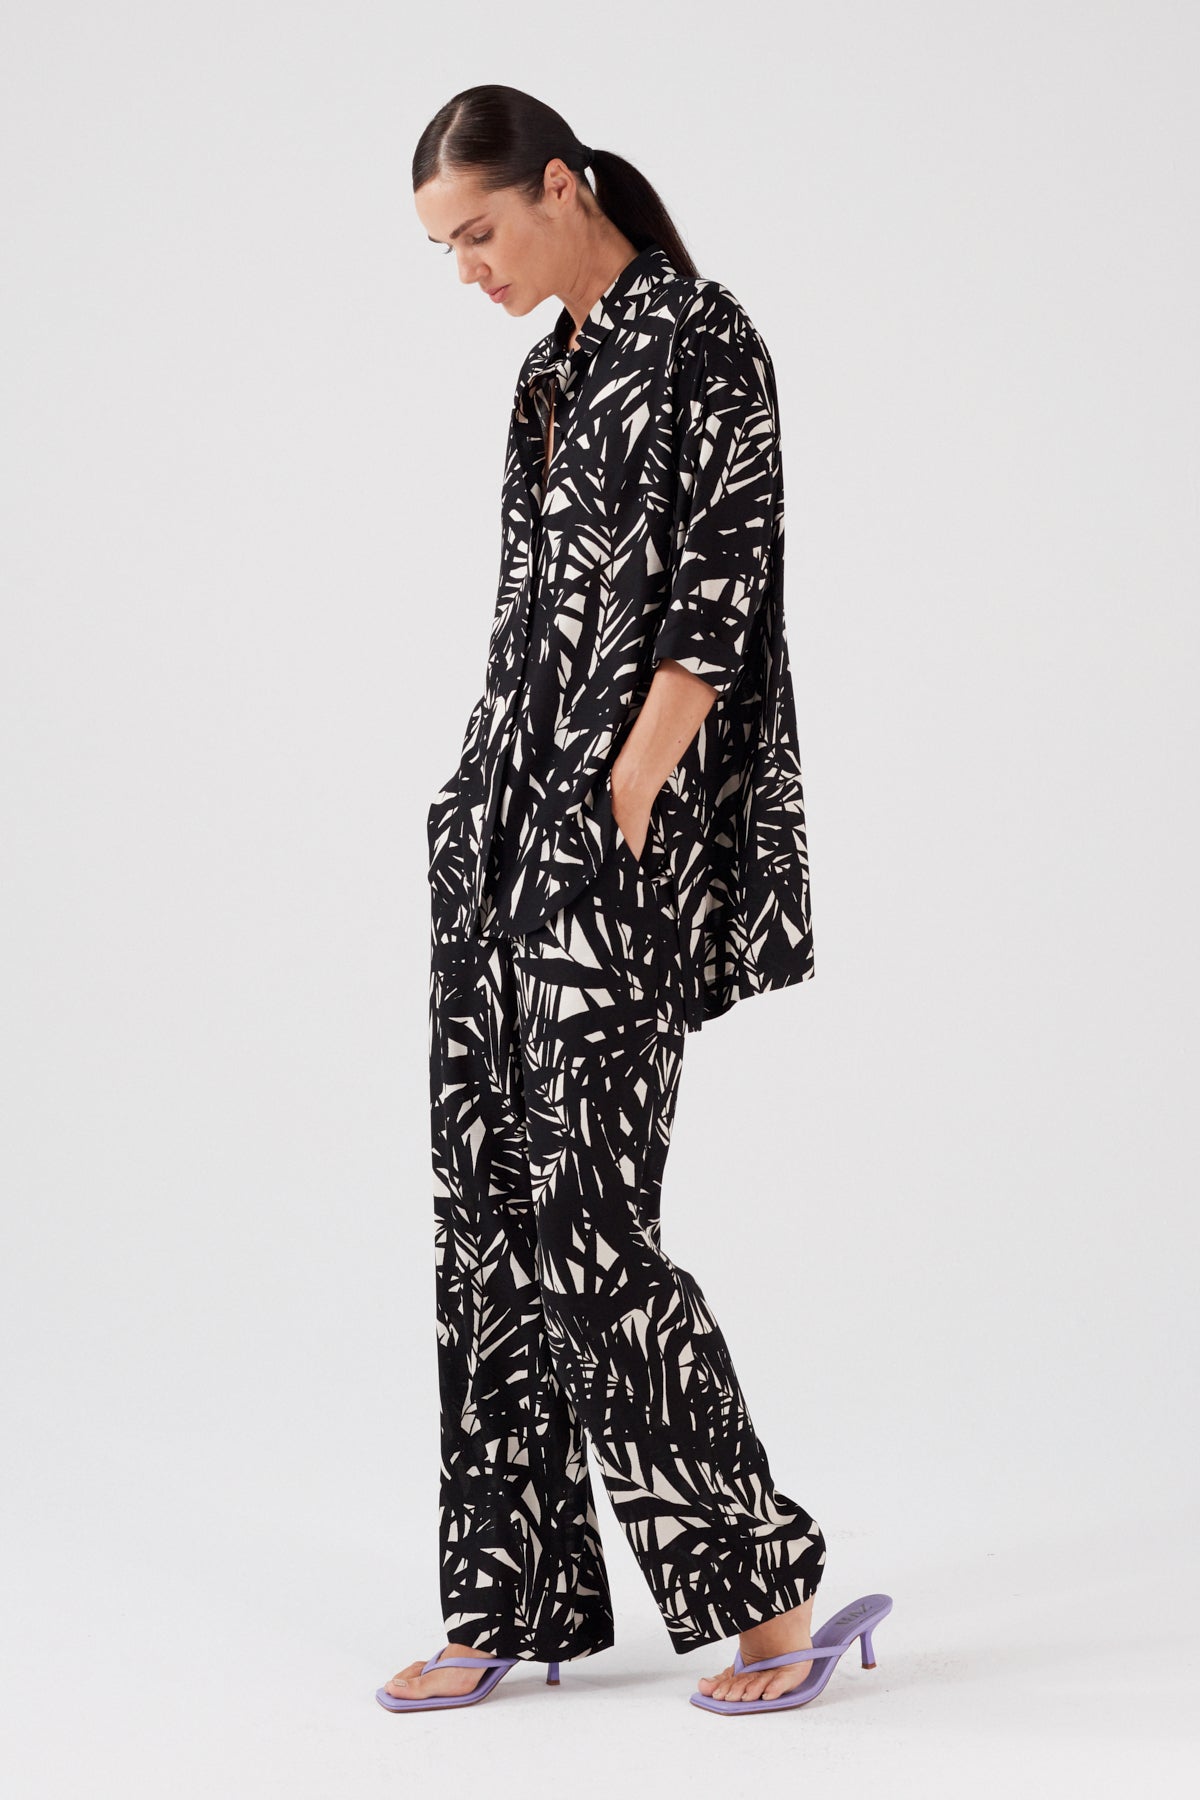 VISCOSE RICH PRINTED TROUSERS